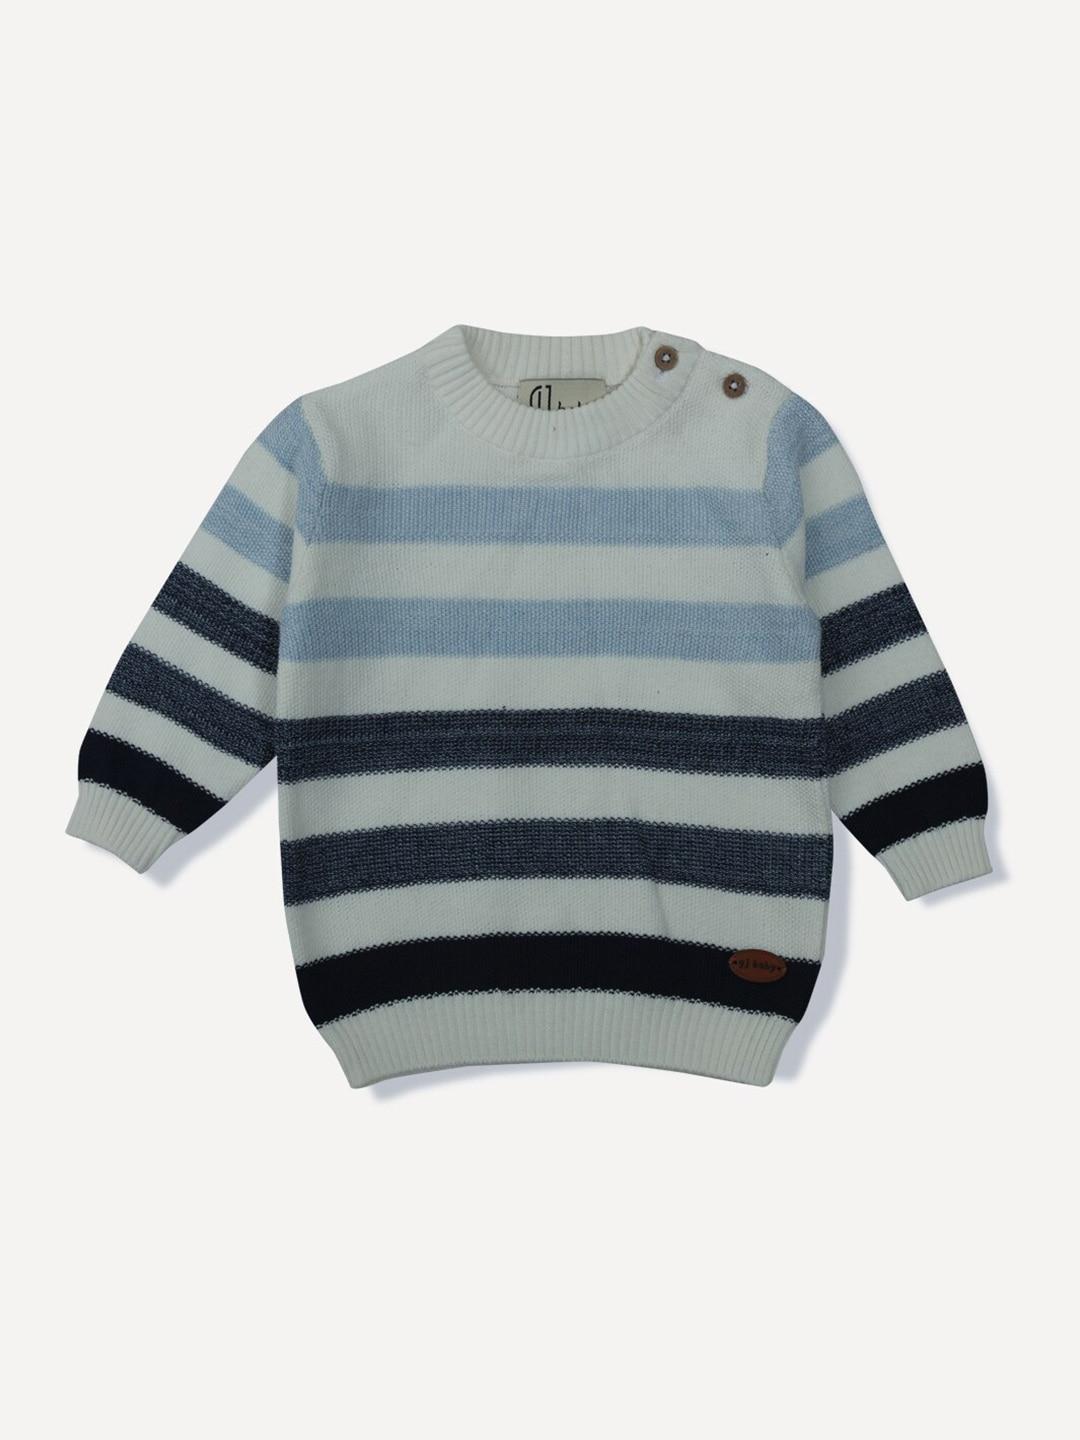 Gini and Jony Infant Boys Striped Pullover Sweater